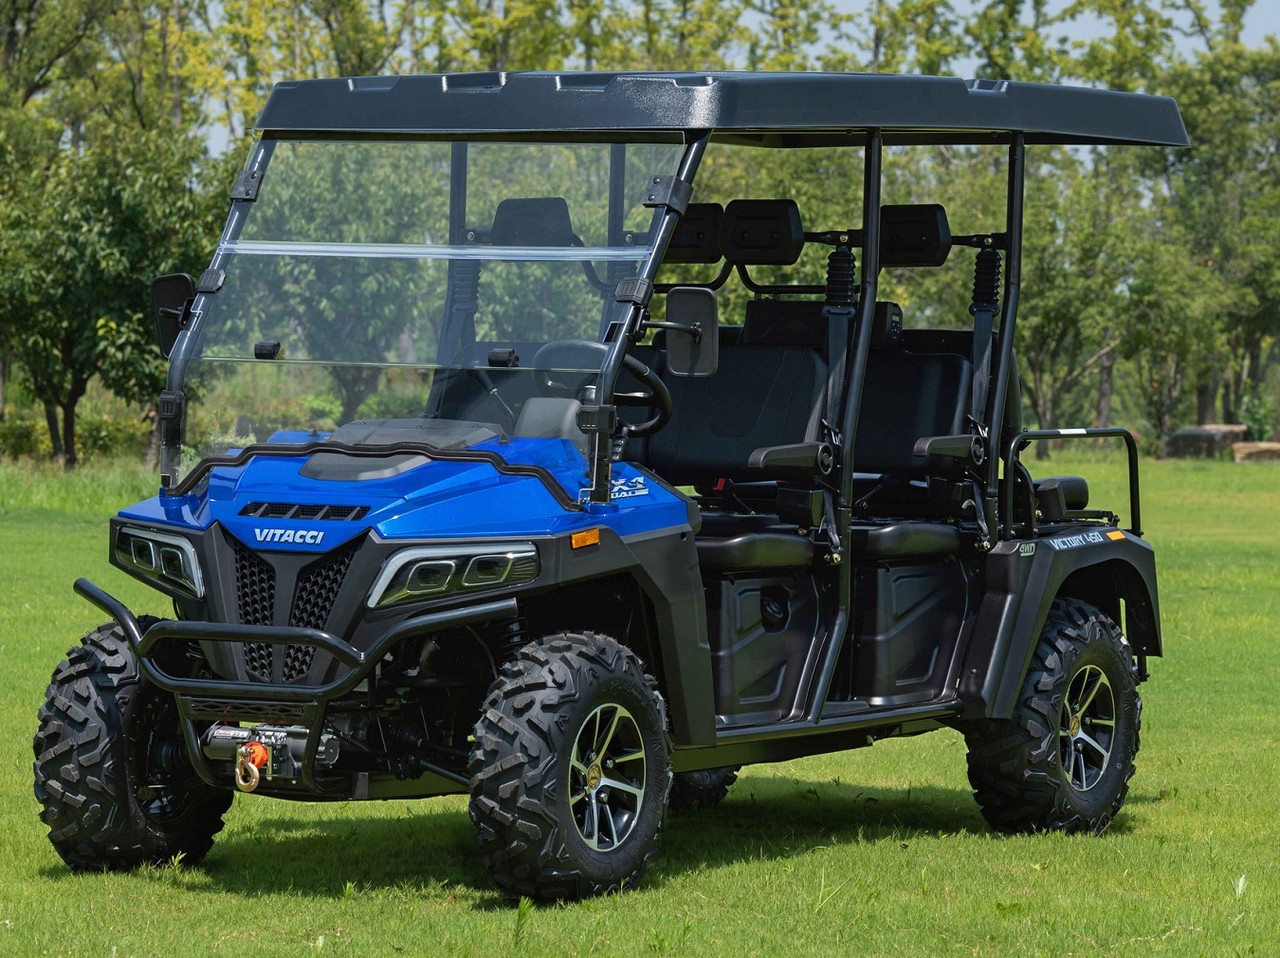 Vitacci Victory 450 Max Dlx 6-Seater Golf cart, Single cylinder, four stroke, water cool - Blue